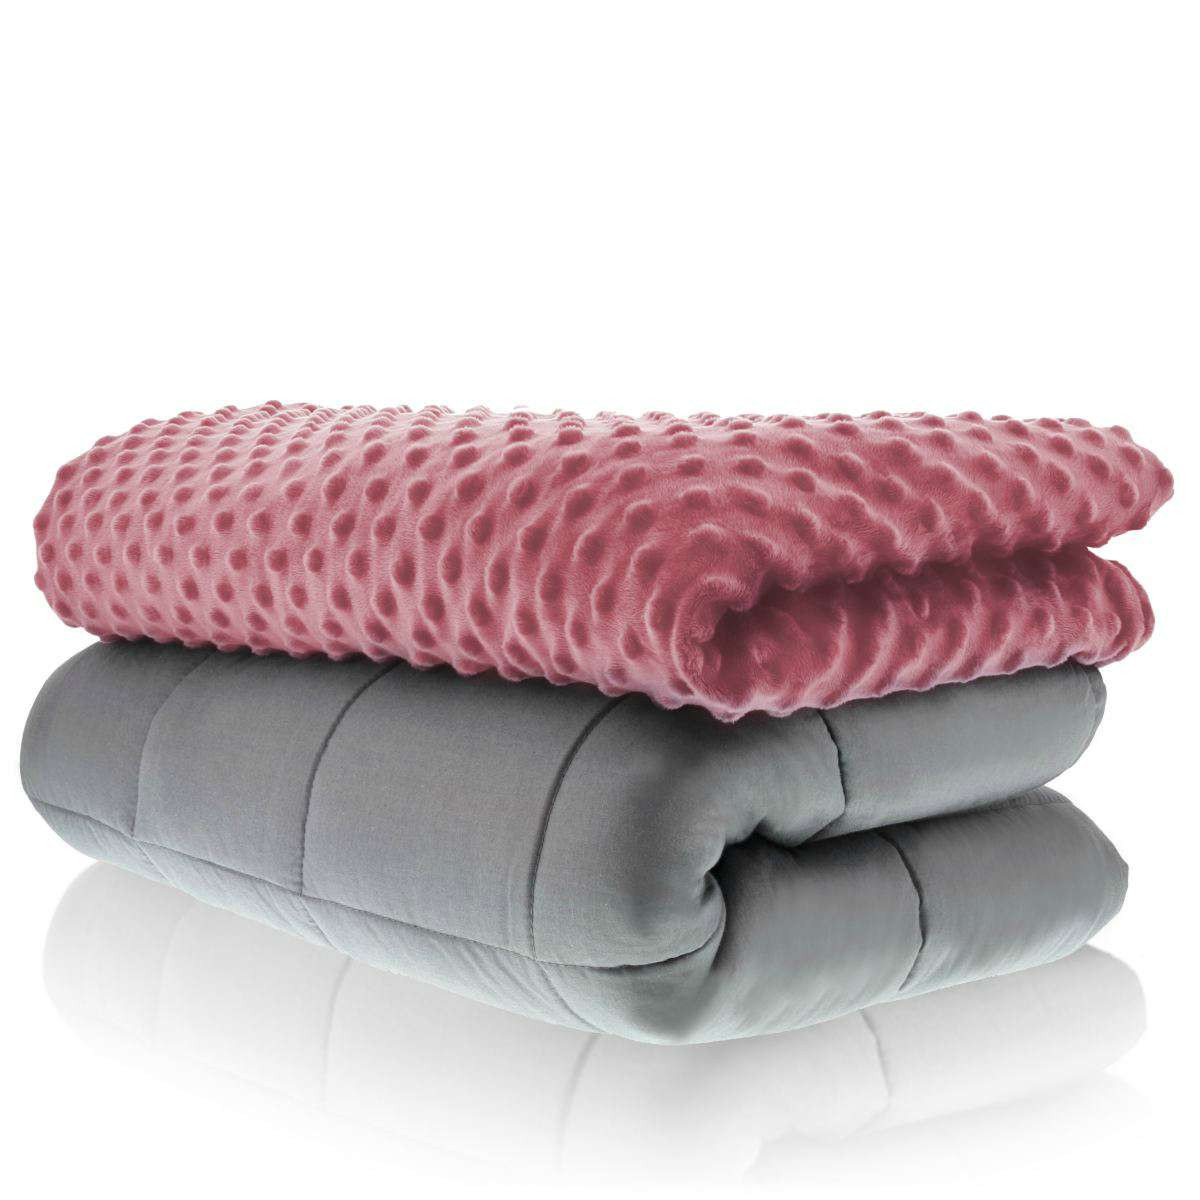 Weighted Blankets For Adults DIY
 Tips Choosing The Best Weighted Blanket For Adults